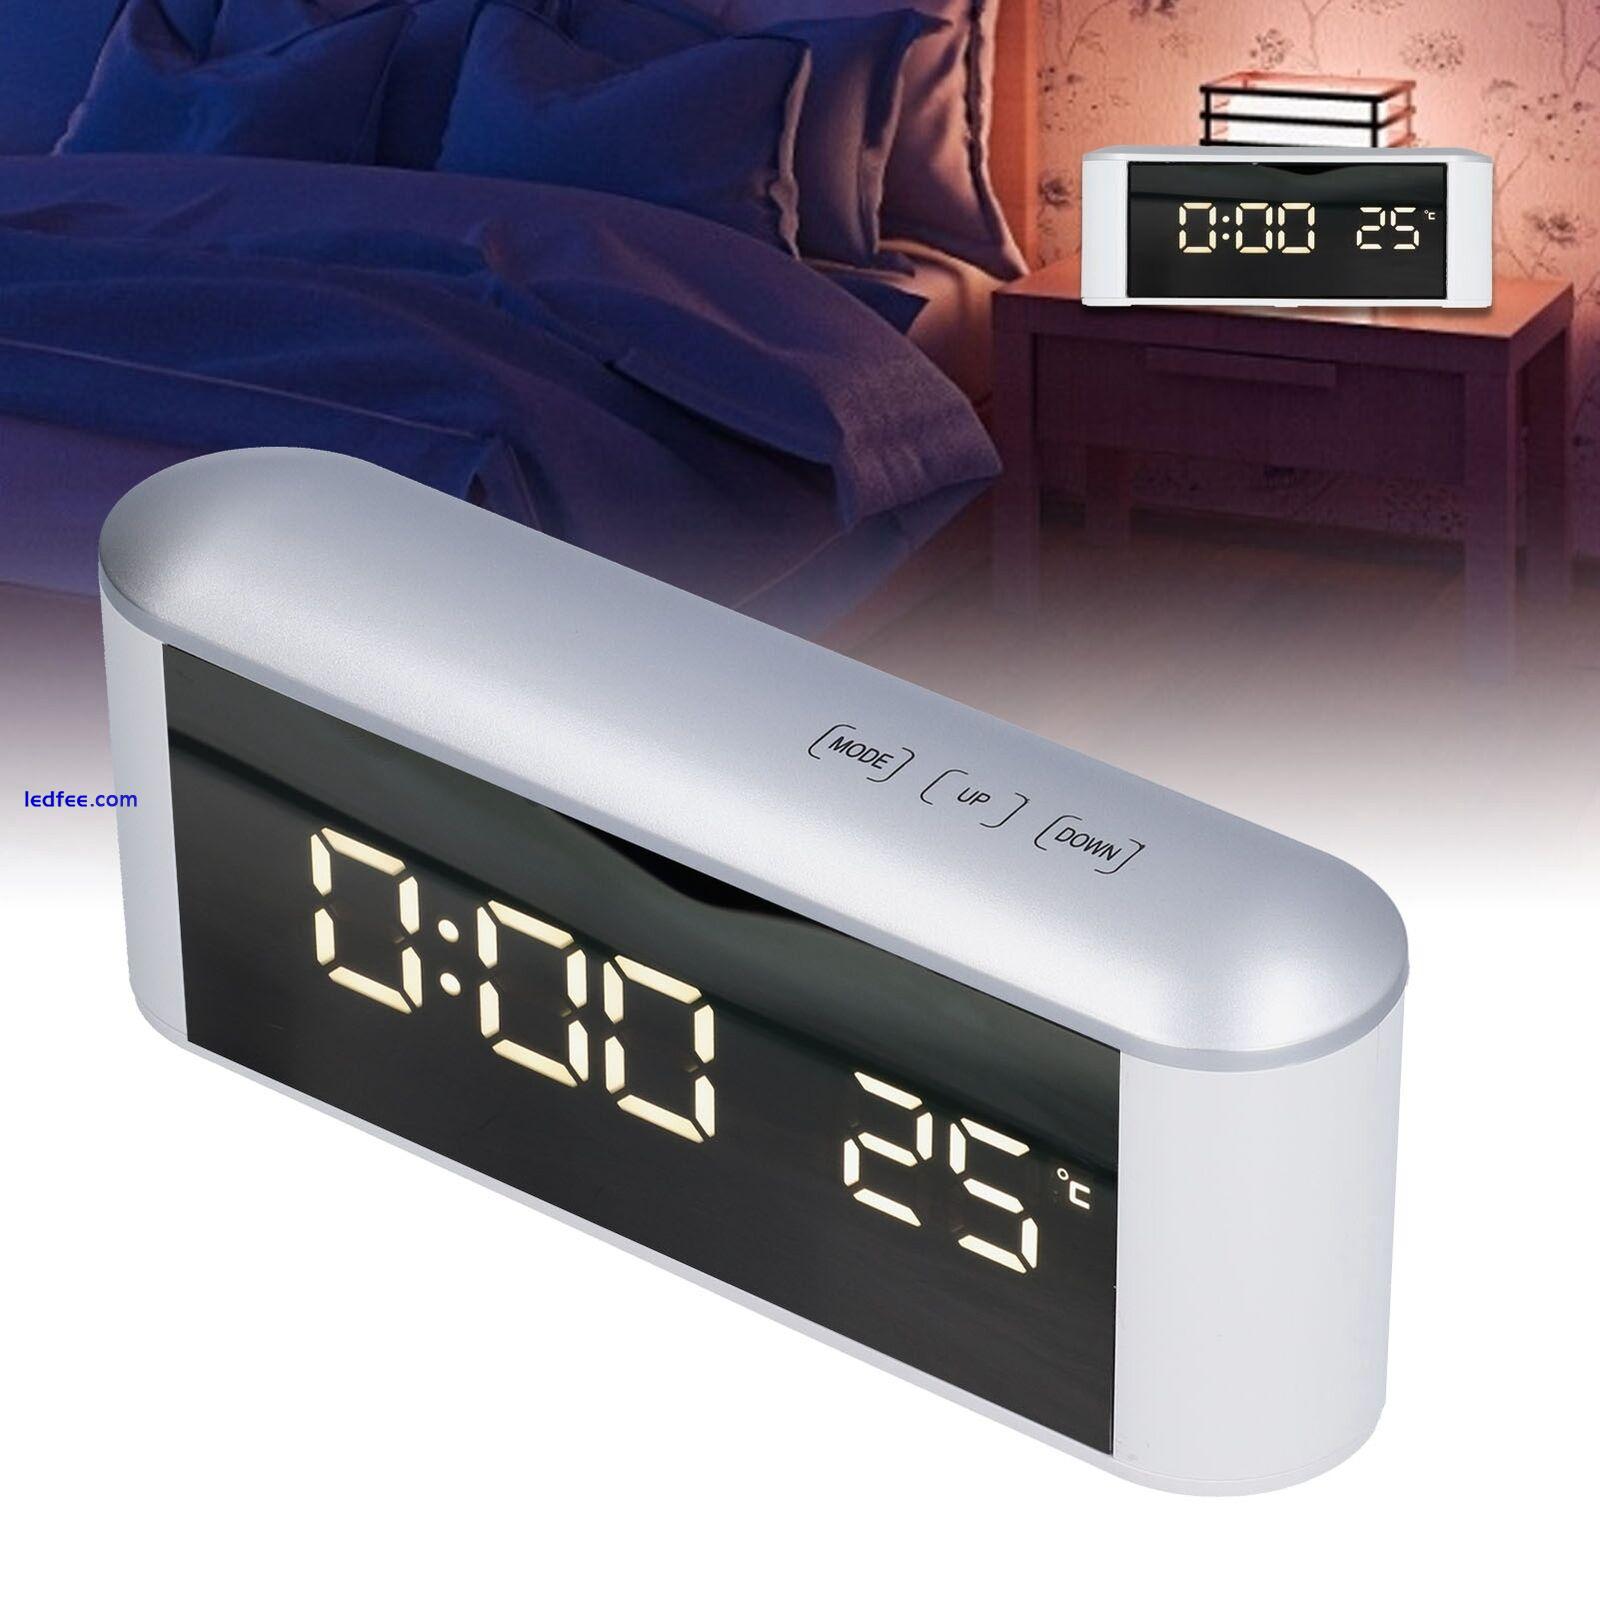 LED Alarm Clock Household Multifunctional Touch Screen Alarm Clock Indoor New 0 